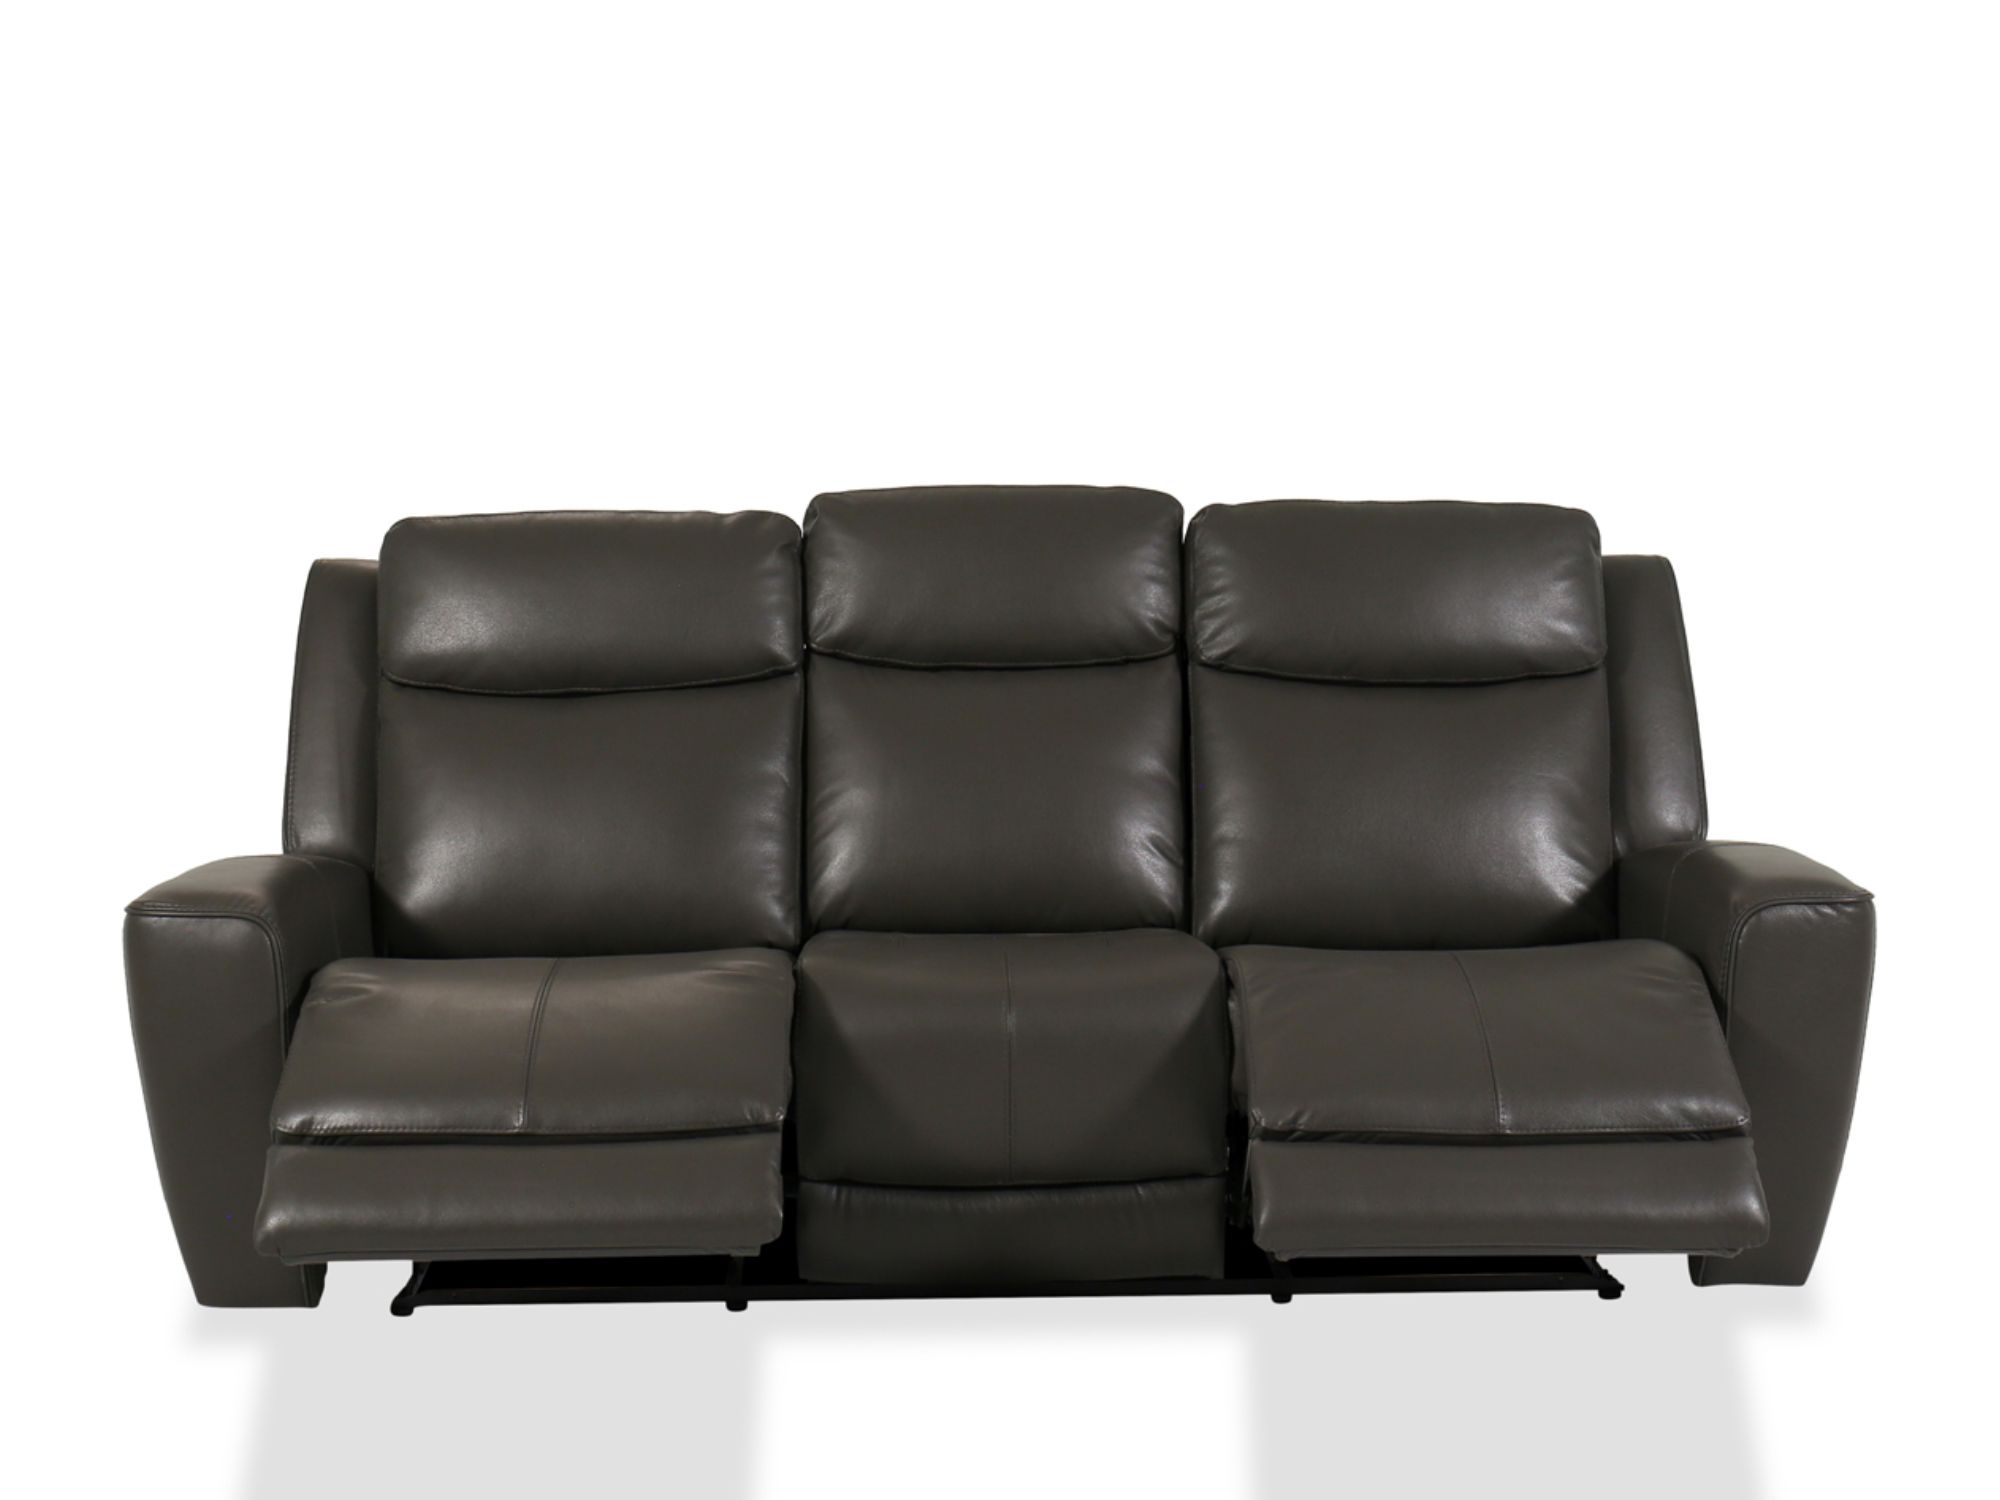 Gray Leather Reclining Sofa That Catch An
  Eye